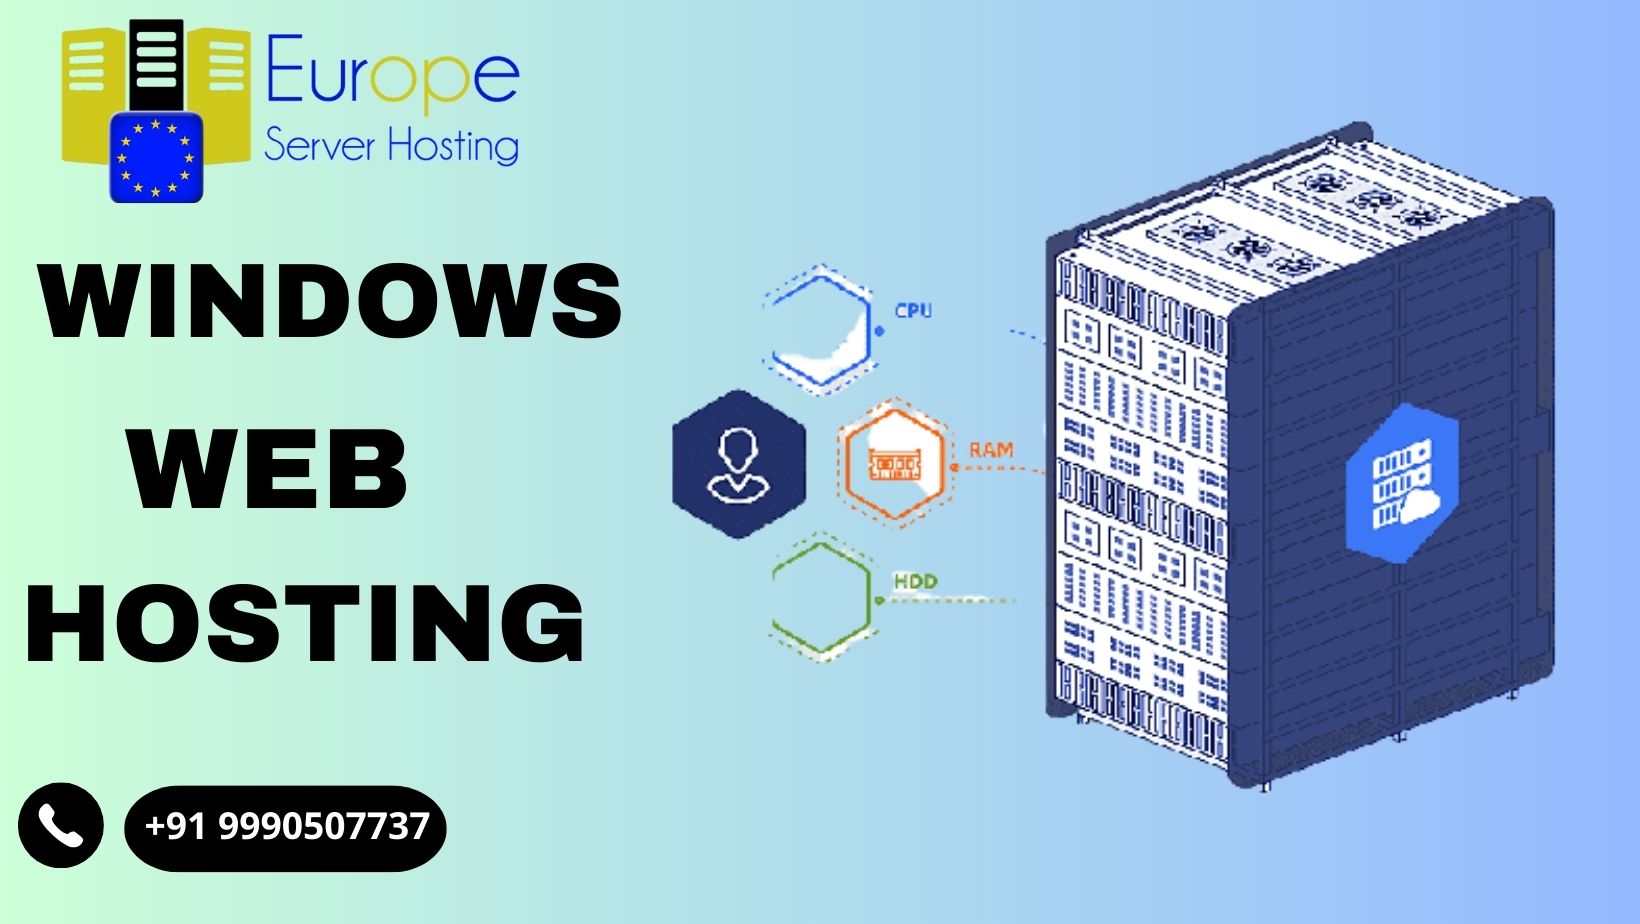 Experience the unrivaled performance and reliability of Windows Web Hosting. Harness the power of cutting-edge technology to supercharge your website's speed and stability. Discover the ultimate hosting solution for your online success.